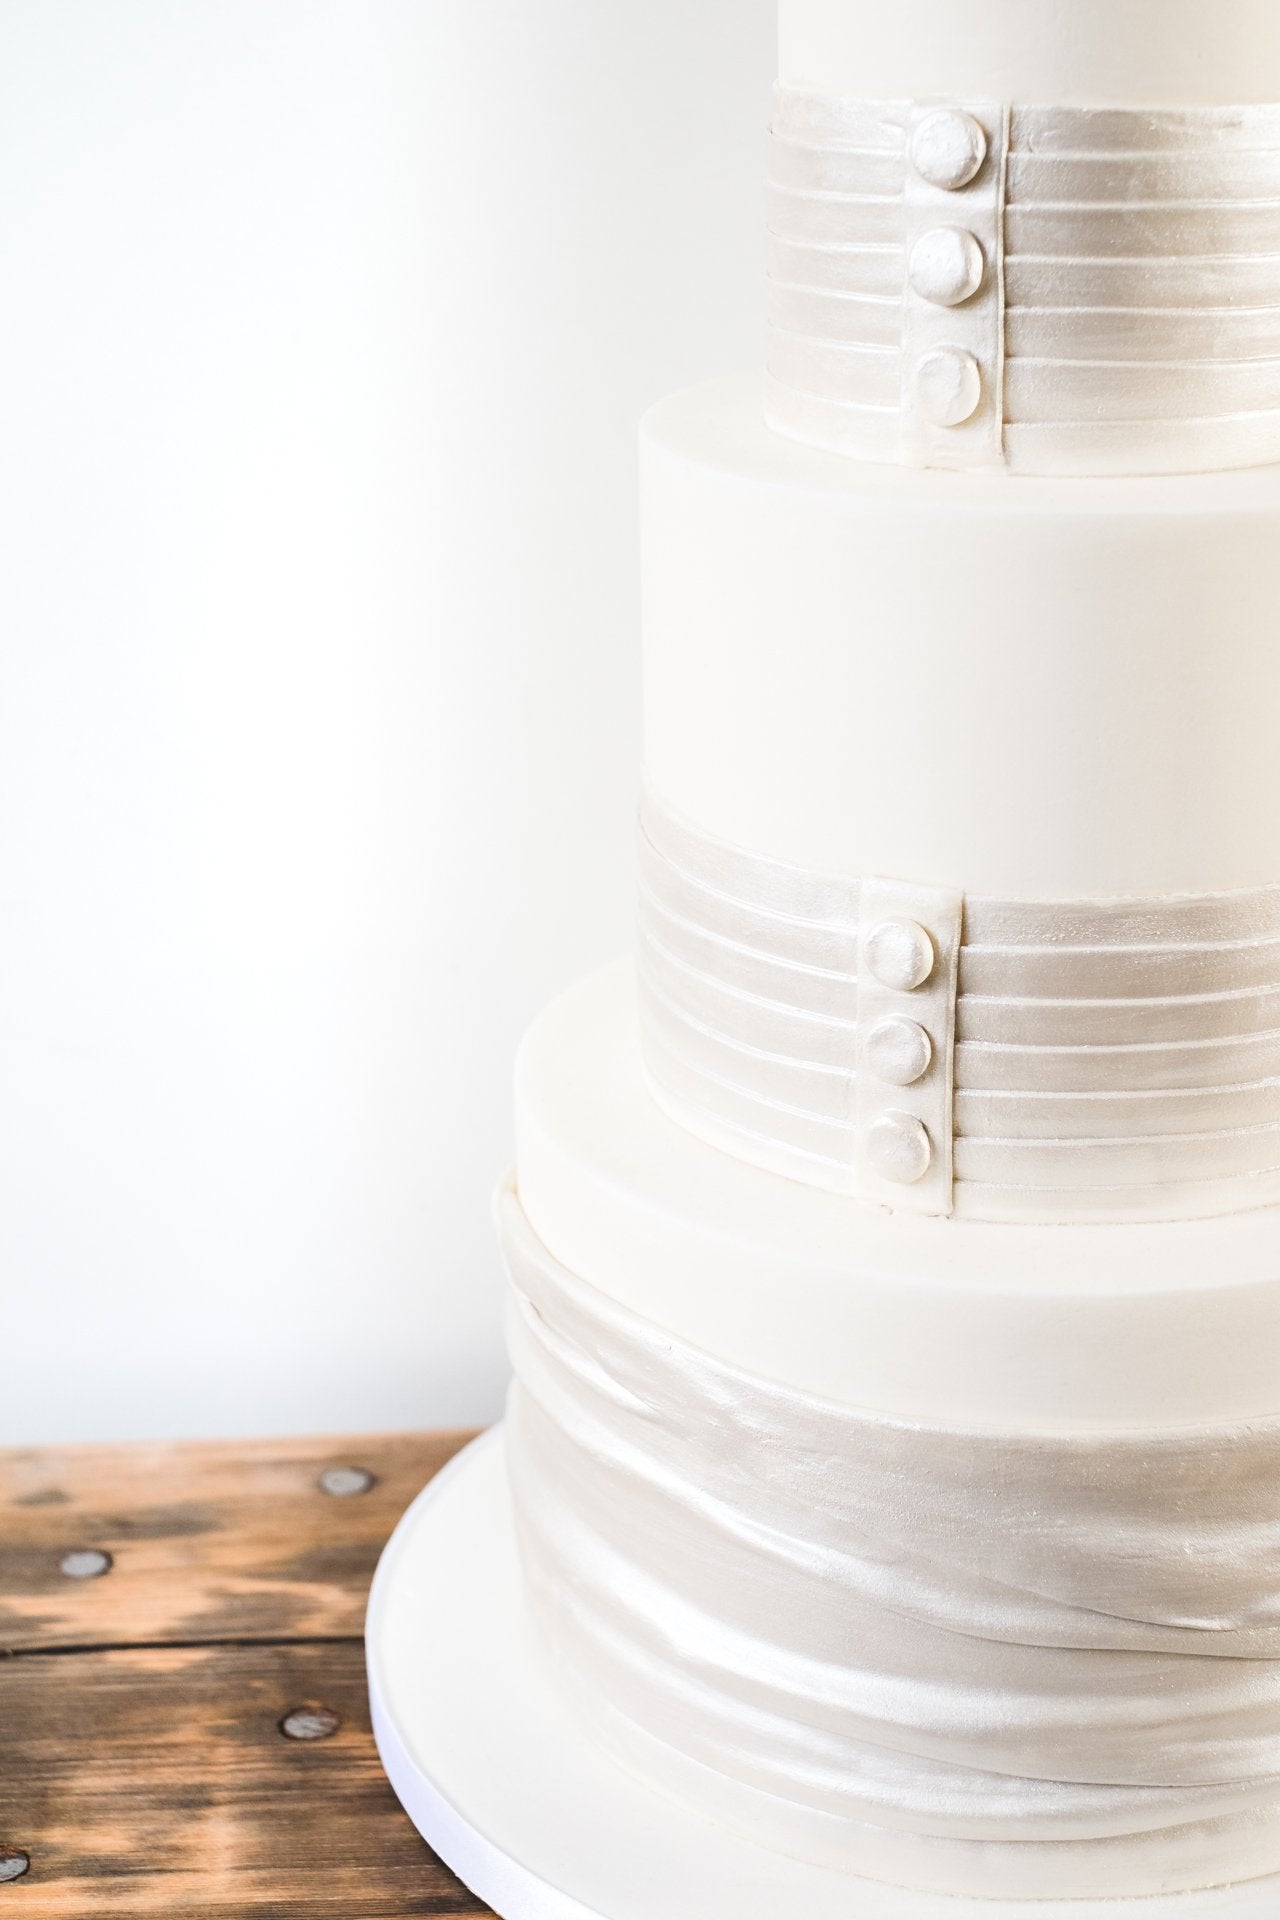 Deep tiered wedding cake decorated with bands of satin look sugarpaste with button detail like the back of a wedding dress.